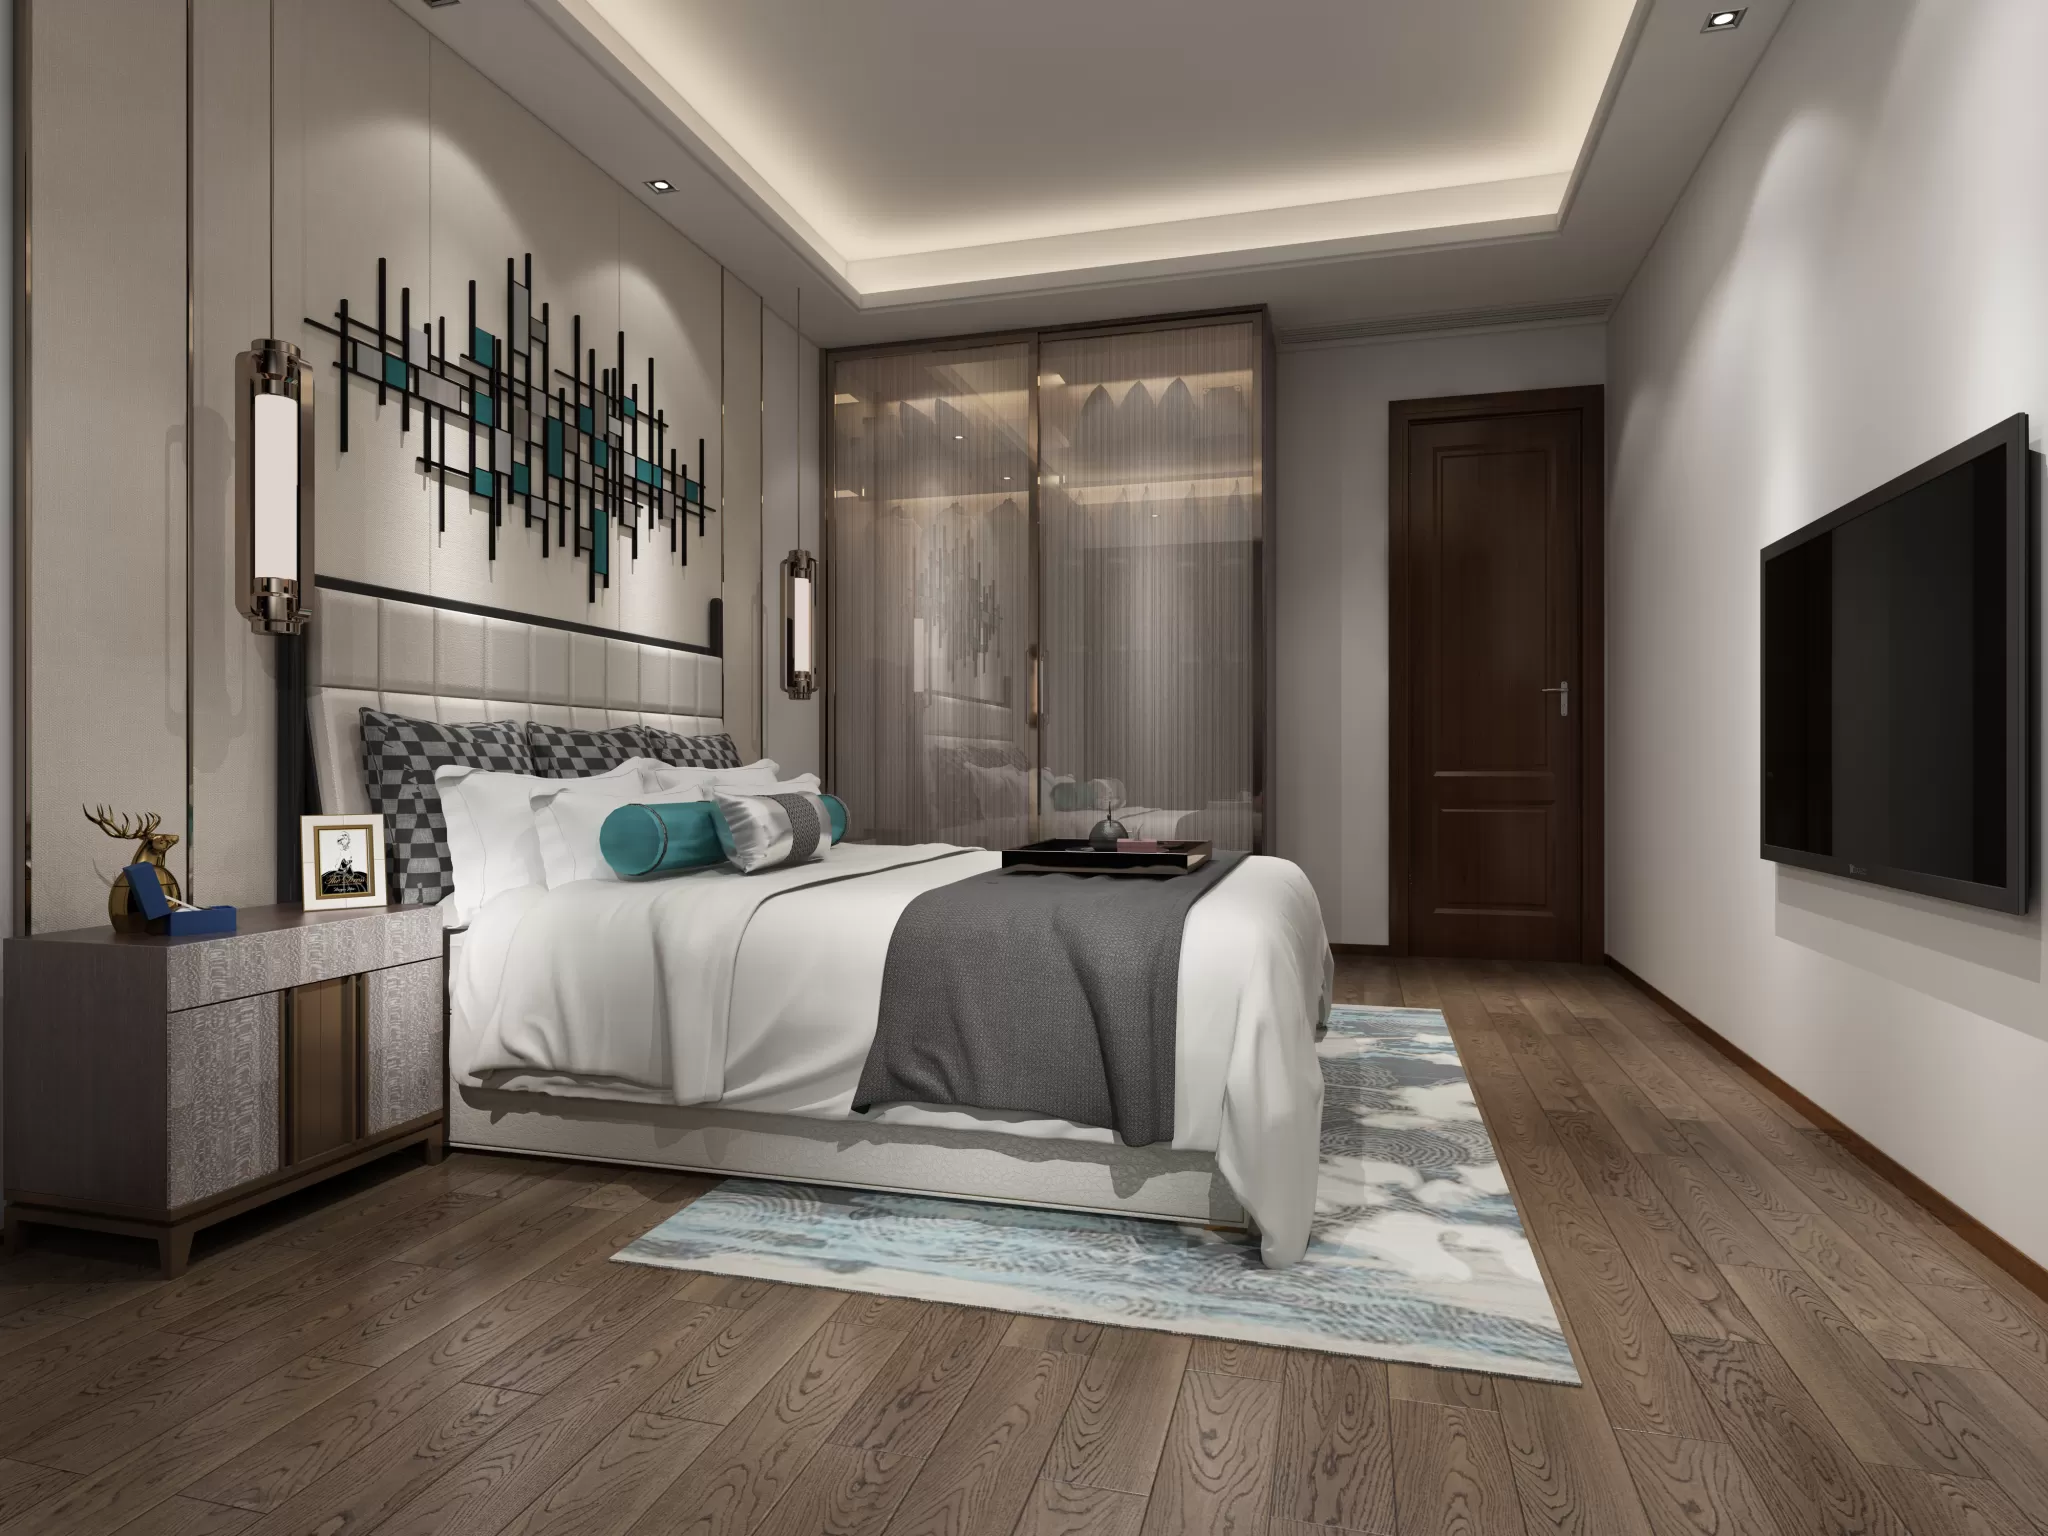 DESMOD INTERIOR 2021 (VRAY)/5. BEDROOM – 2. CHINESE STYLES – 033